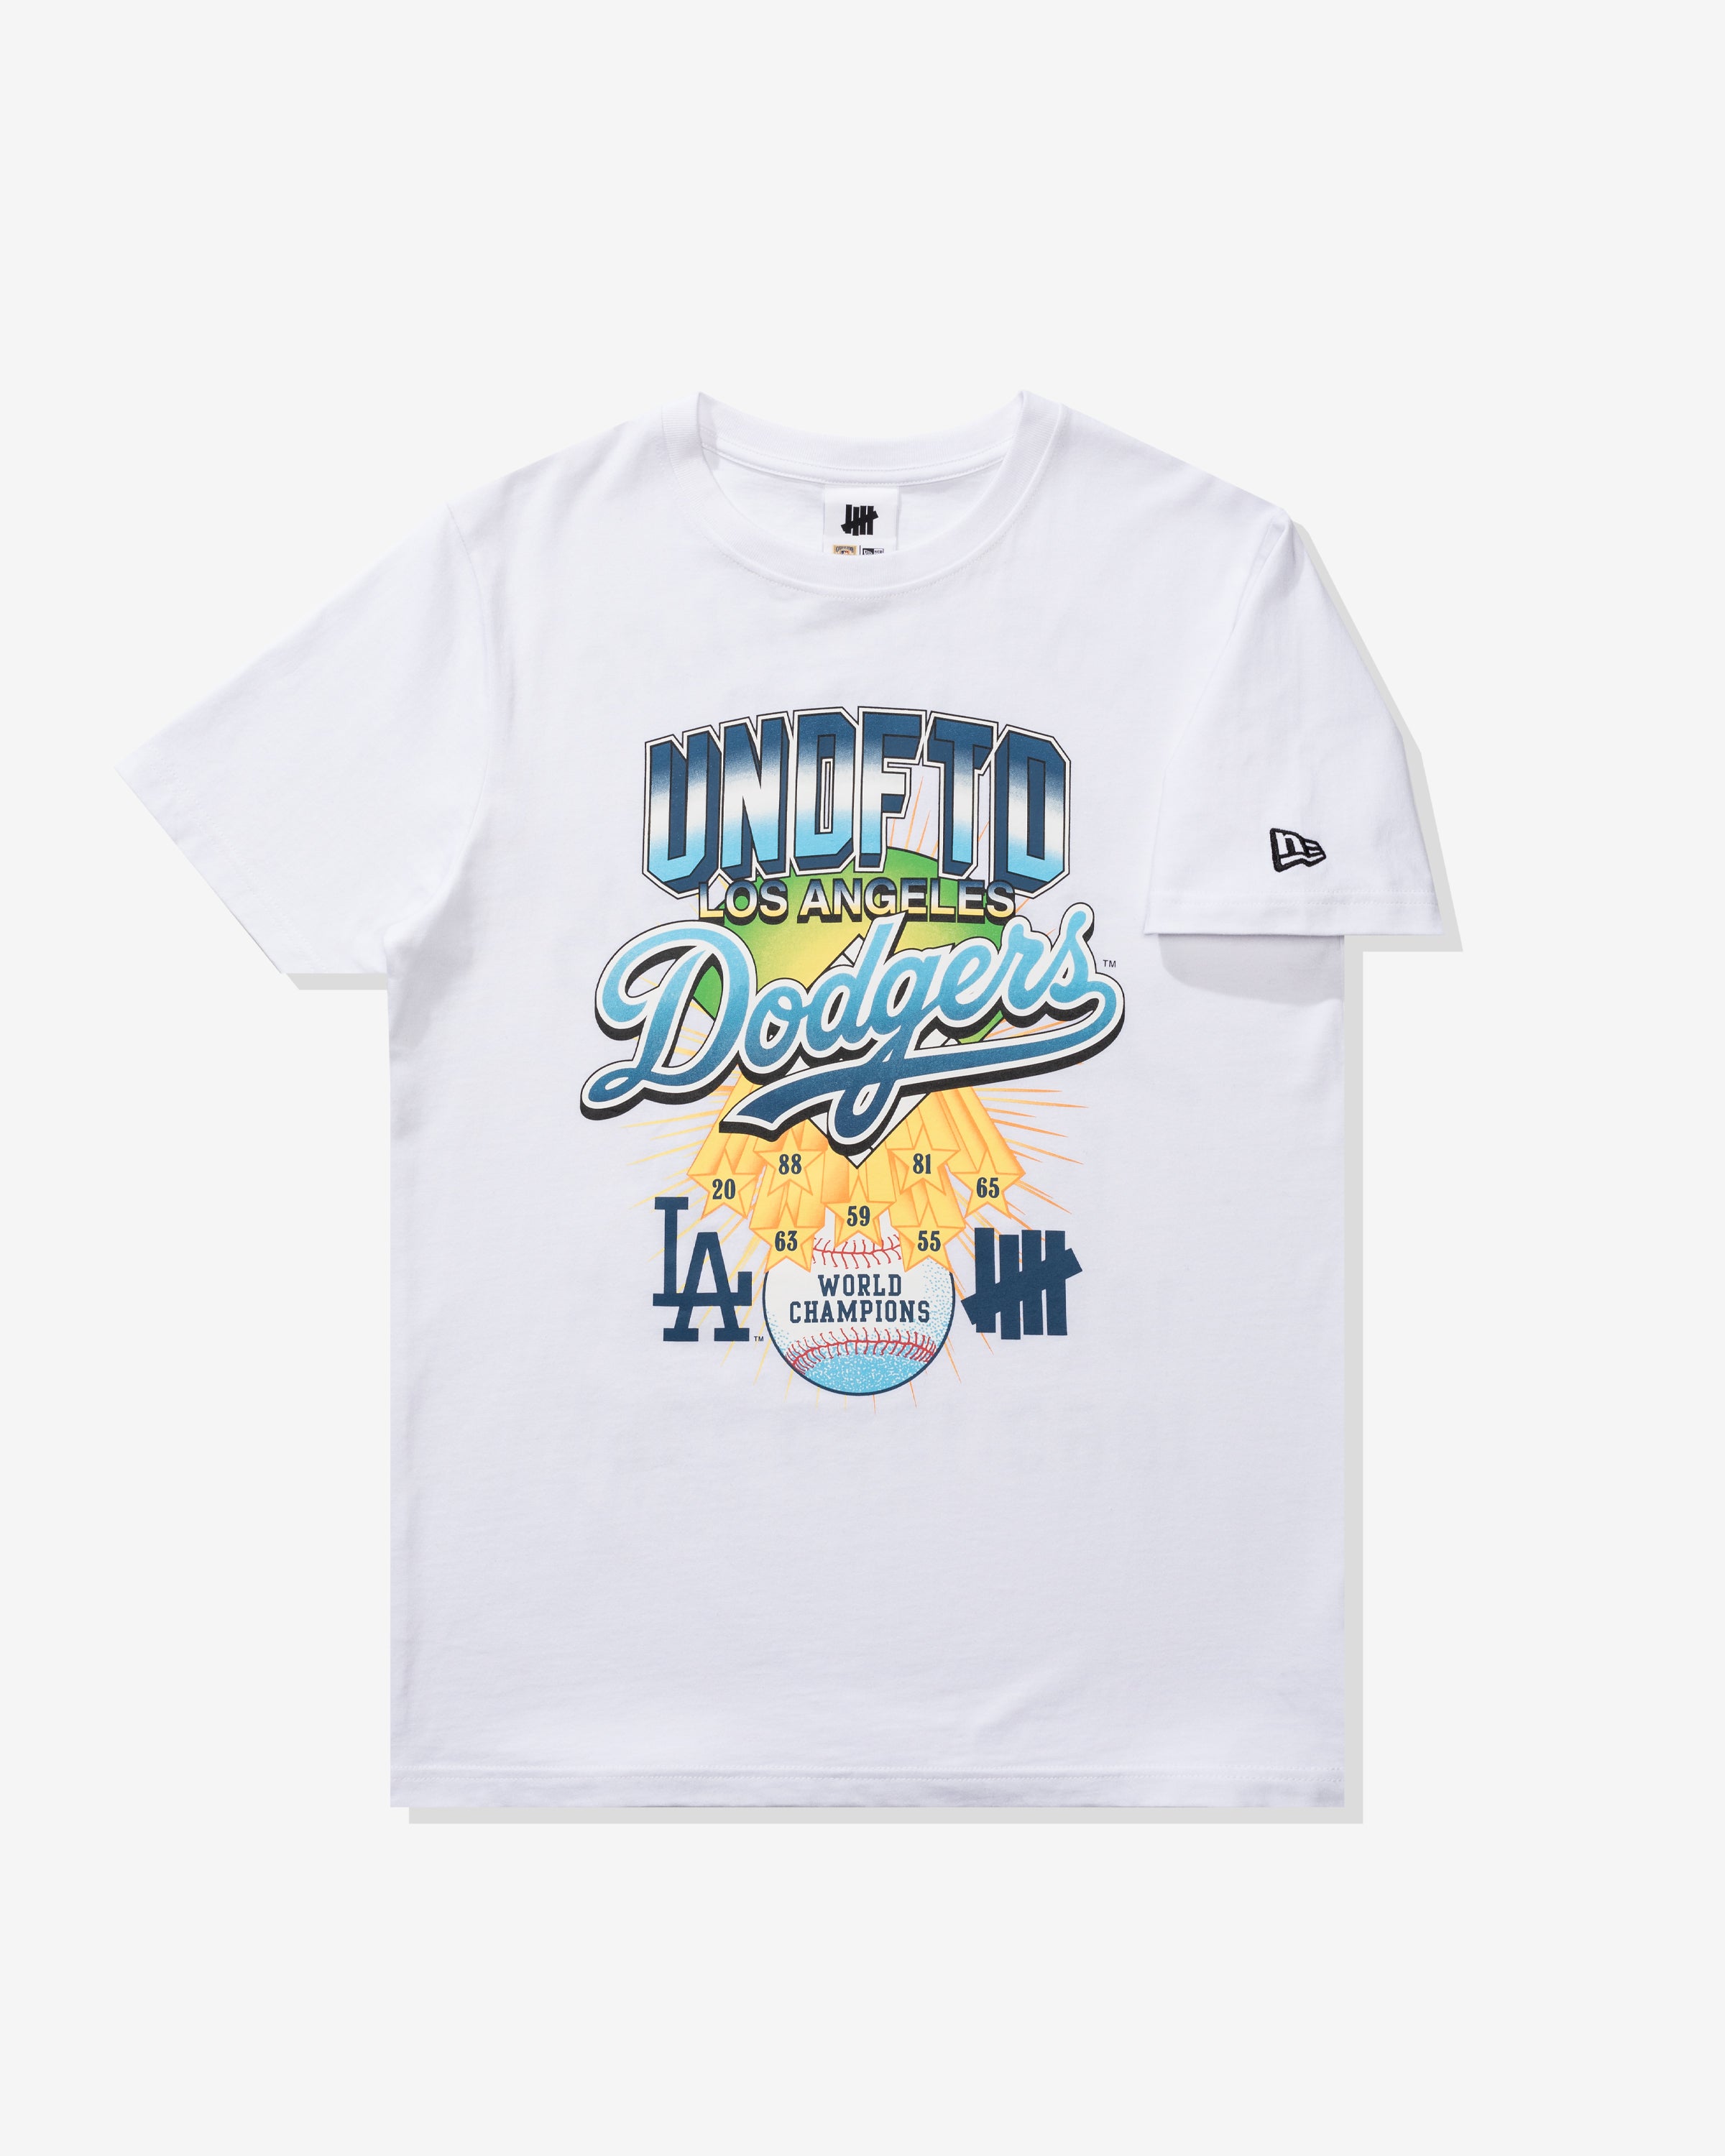 Los Angeles Dodgers Guide Champion Shirt 